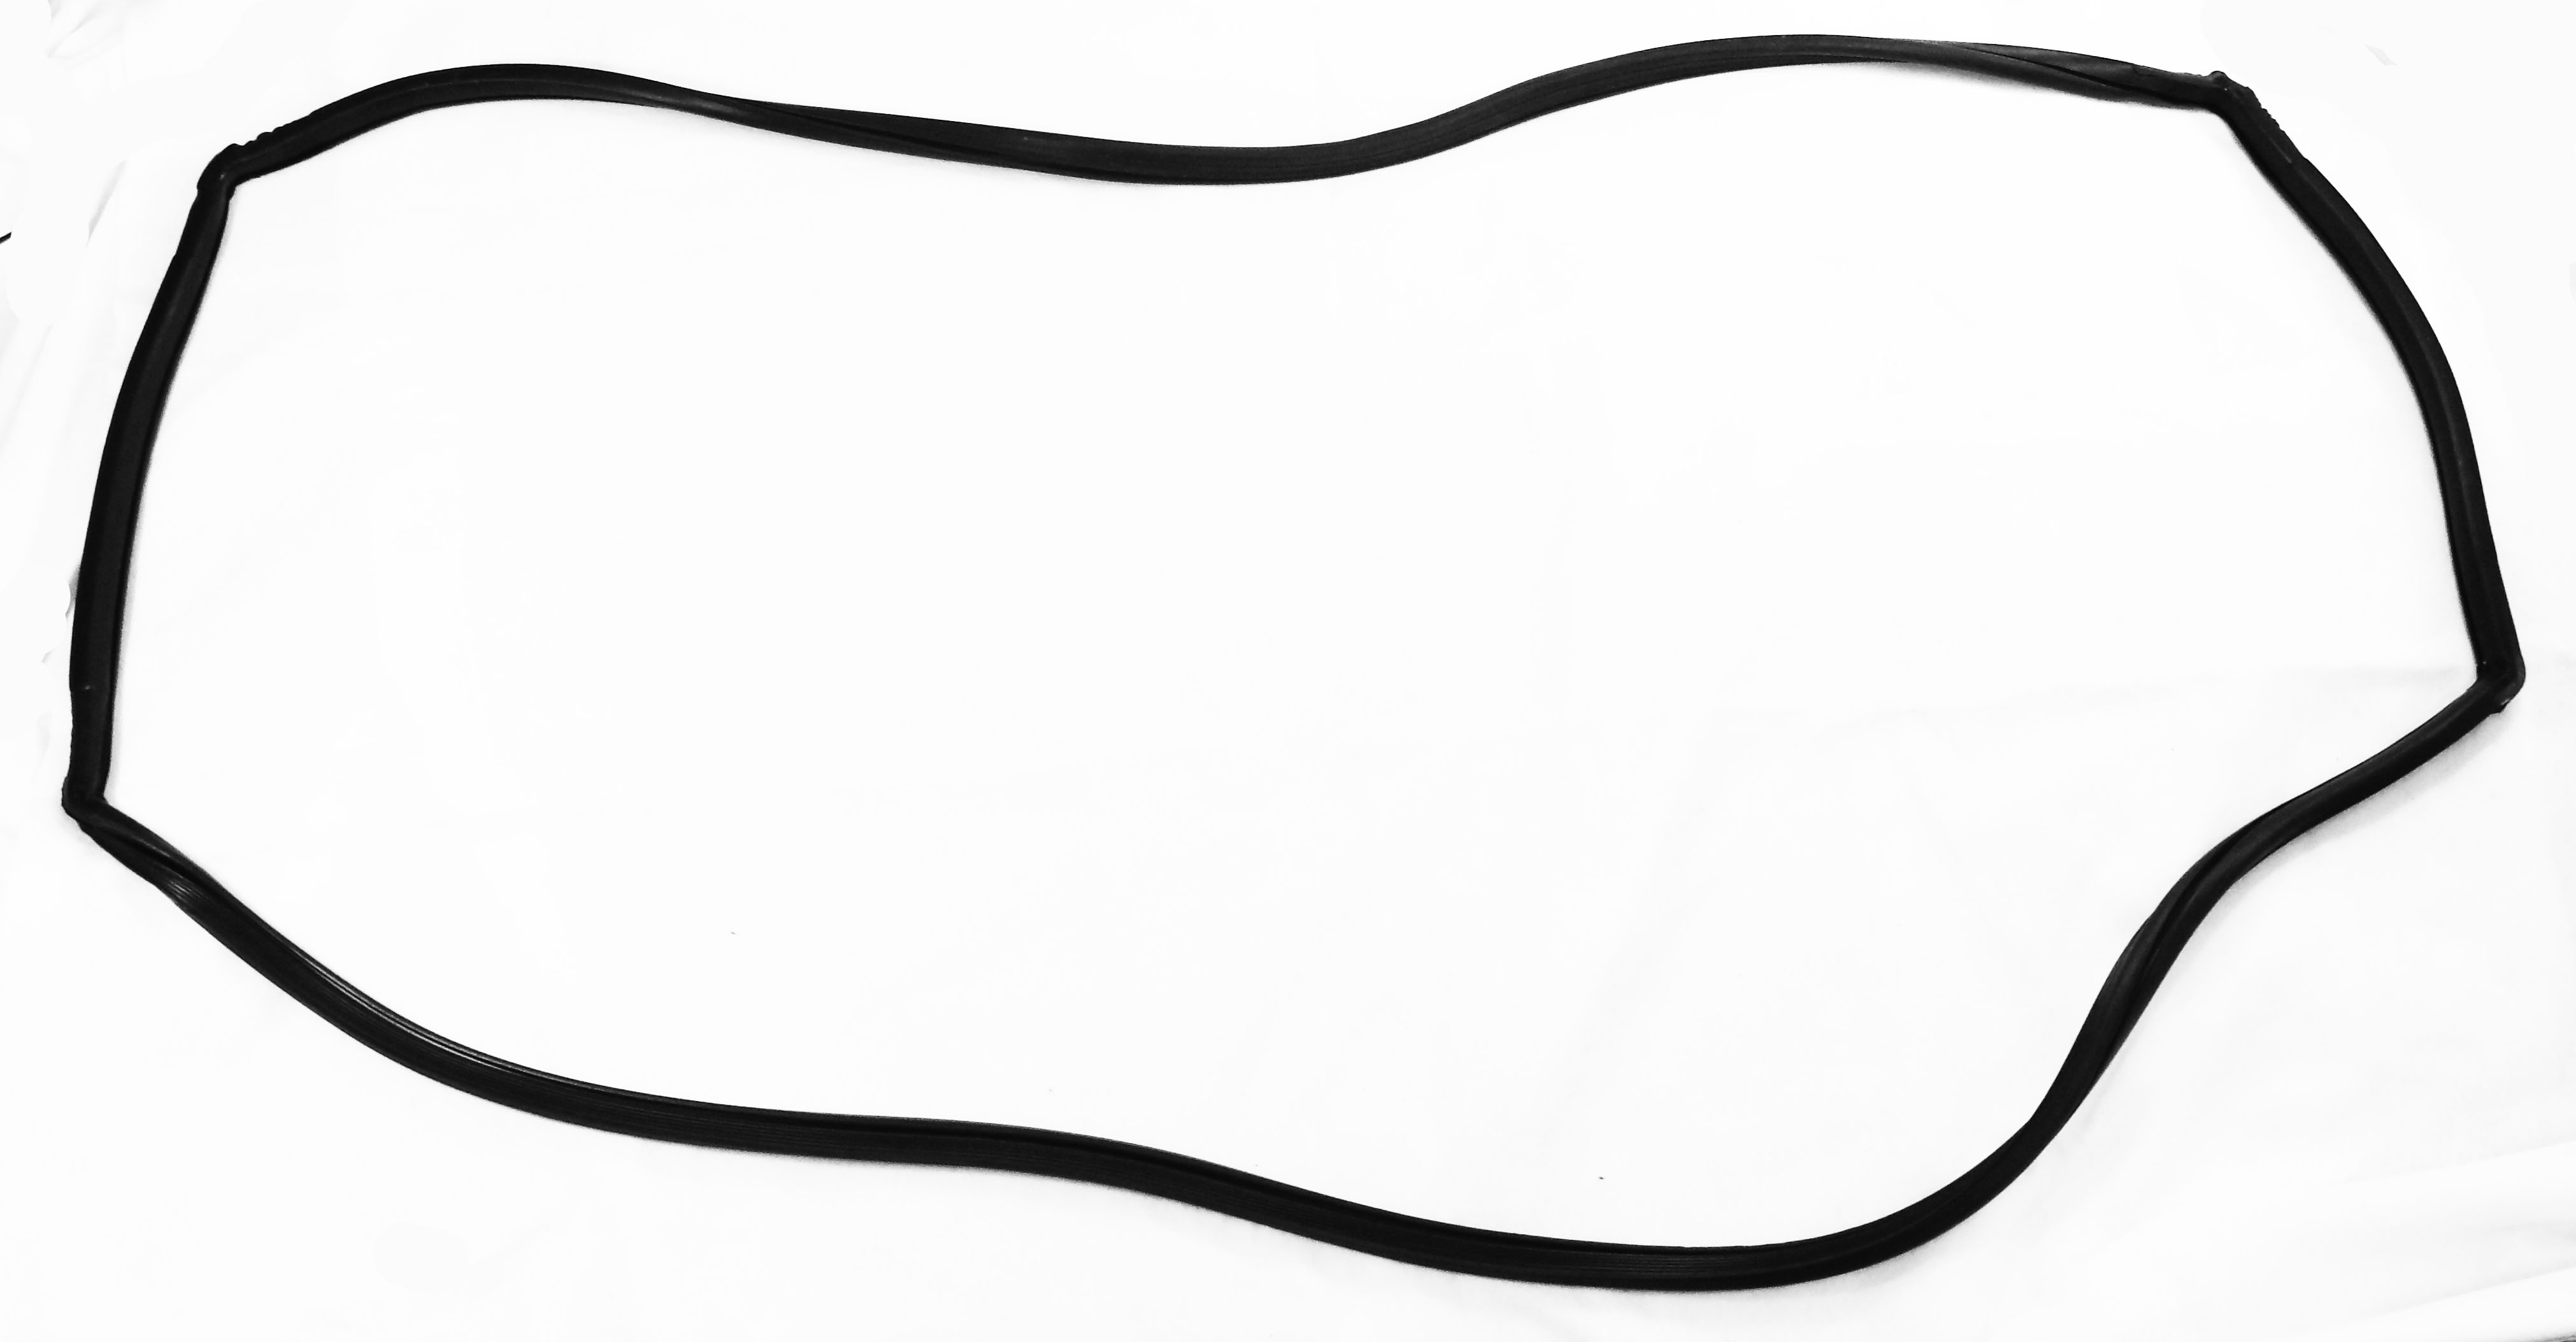 Rear Glass Channel For 1953-1954 Chevrolet Bel Air Hard Top.